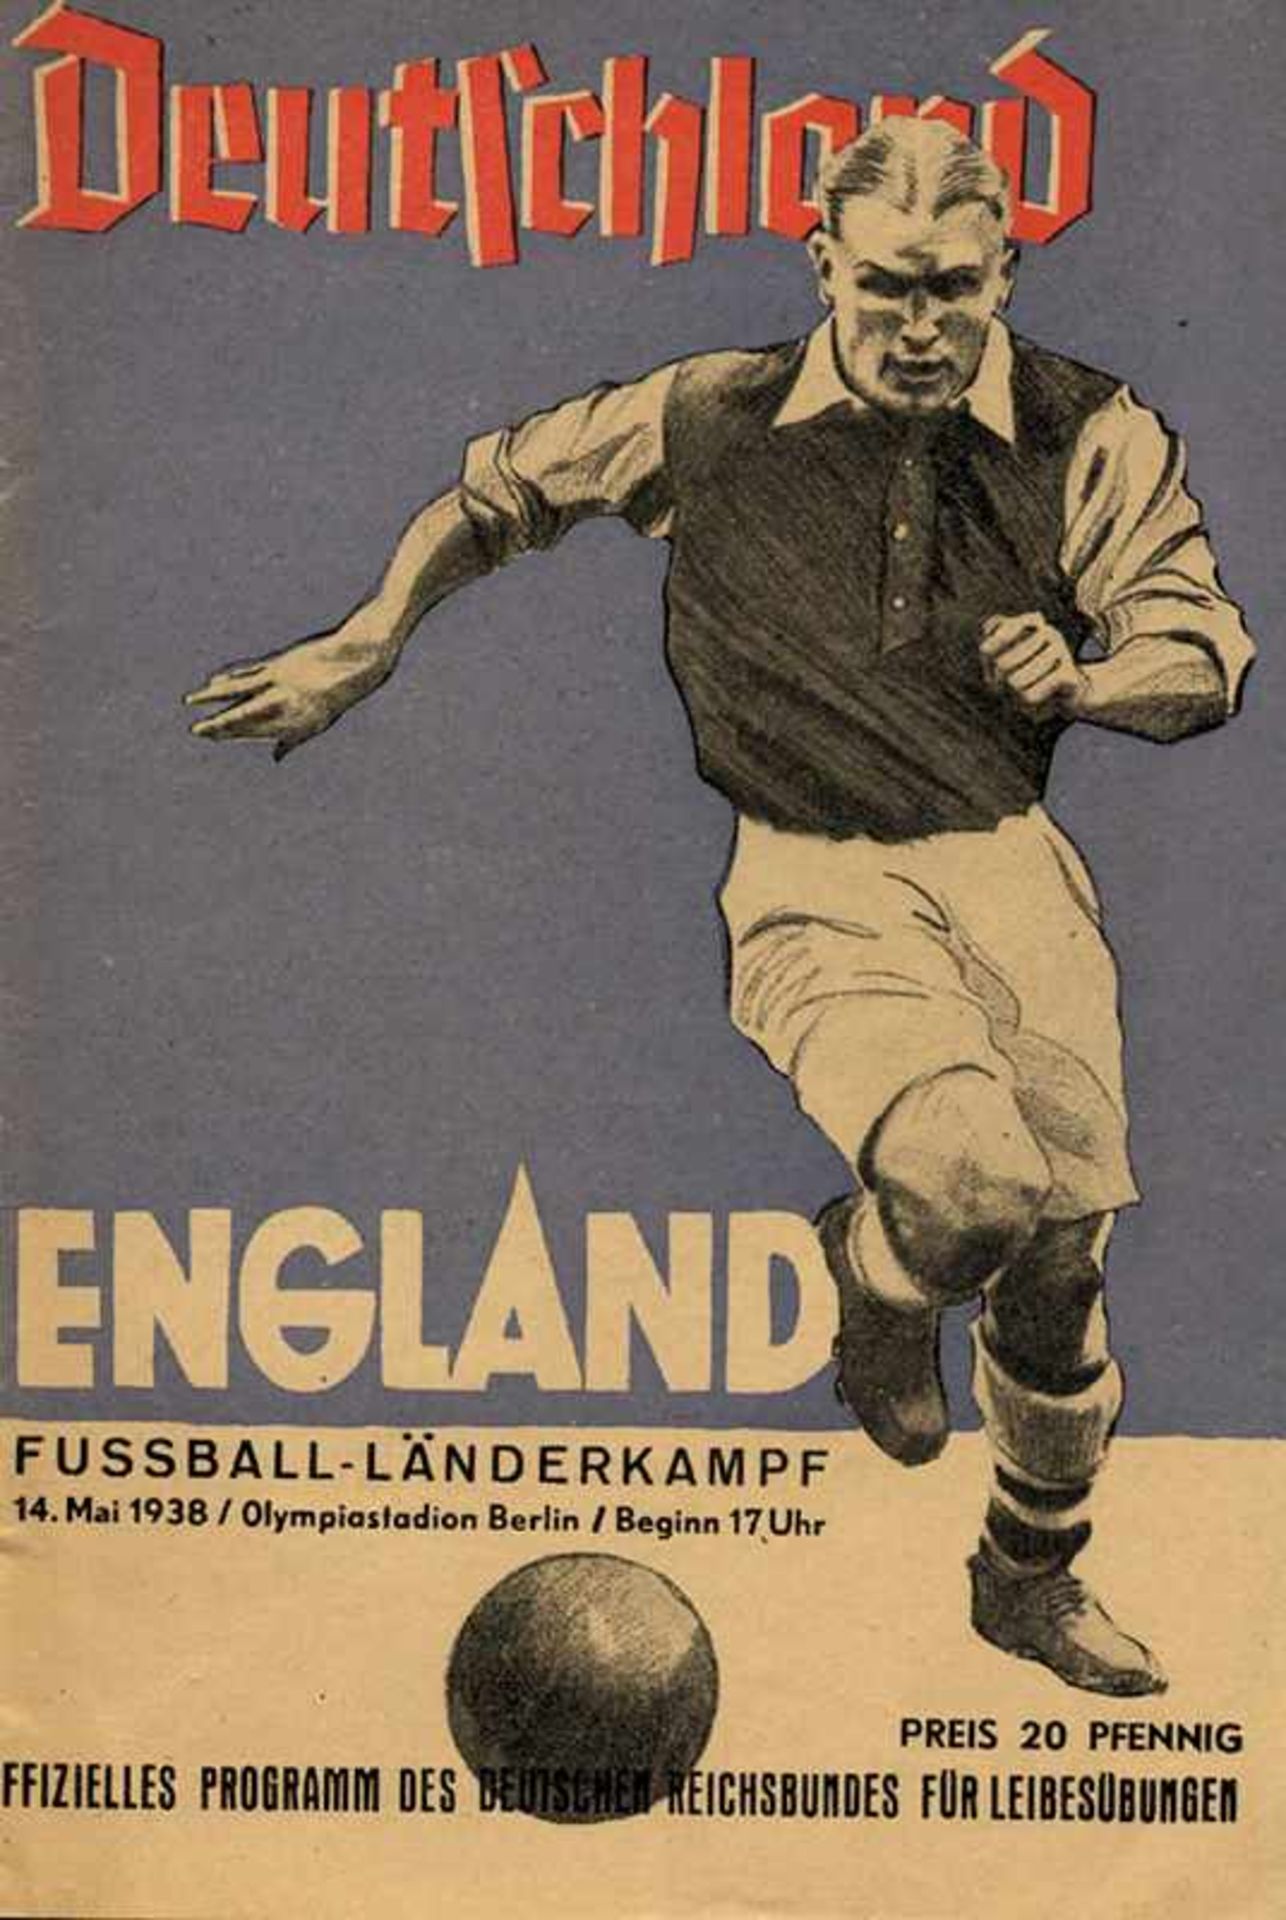 Football Programme 1938 Germany v England in Berl - on 14th may 1938. 36 pages, 15x21 cm, Official